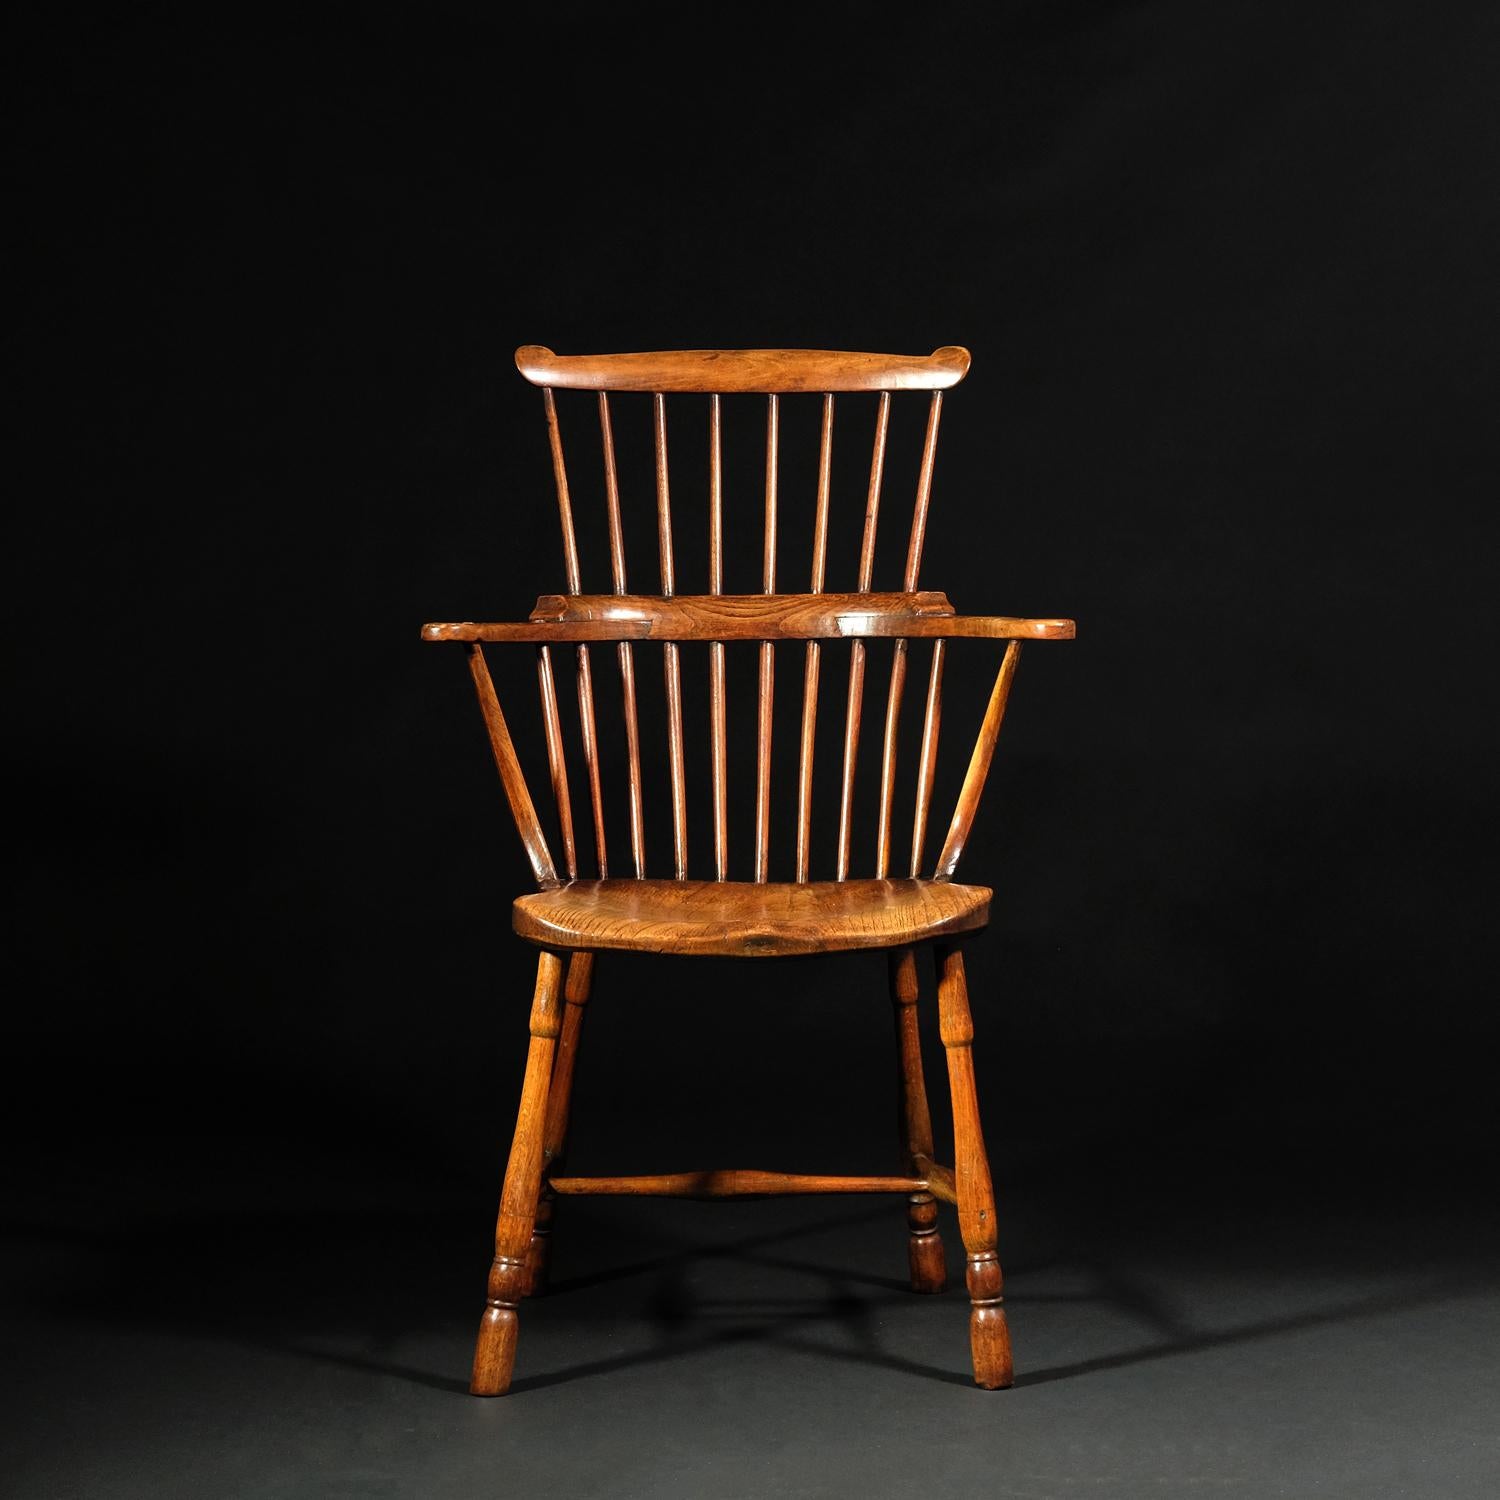 A fruitwood comb back Windsor chair, sometimes referred to as a Goldsmith chair as it bears a resemblance to the chair once owned by 18th Century author, Oliver Goldsmith, now in the V&A. Egg and reel turned legs, both front and rear, united by a